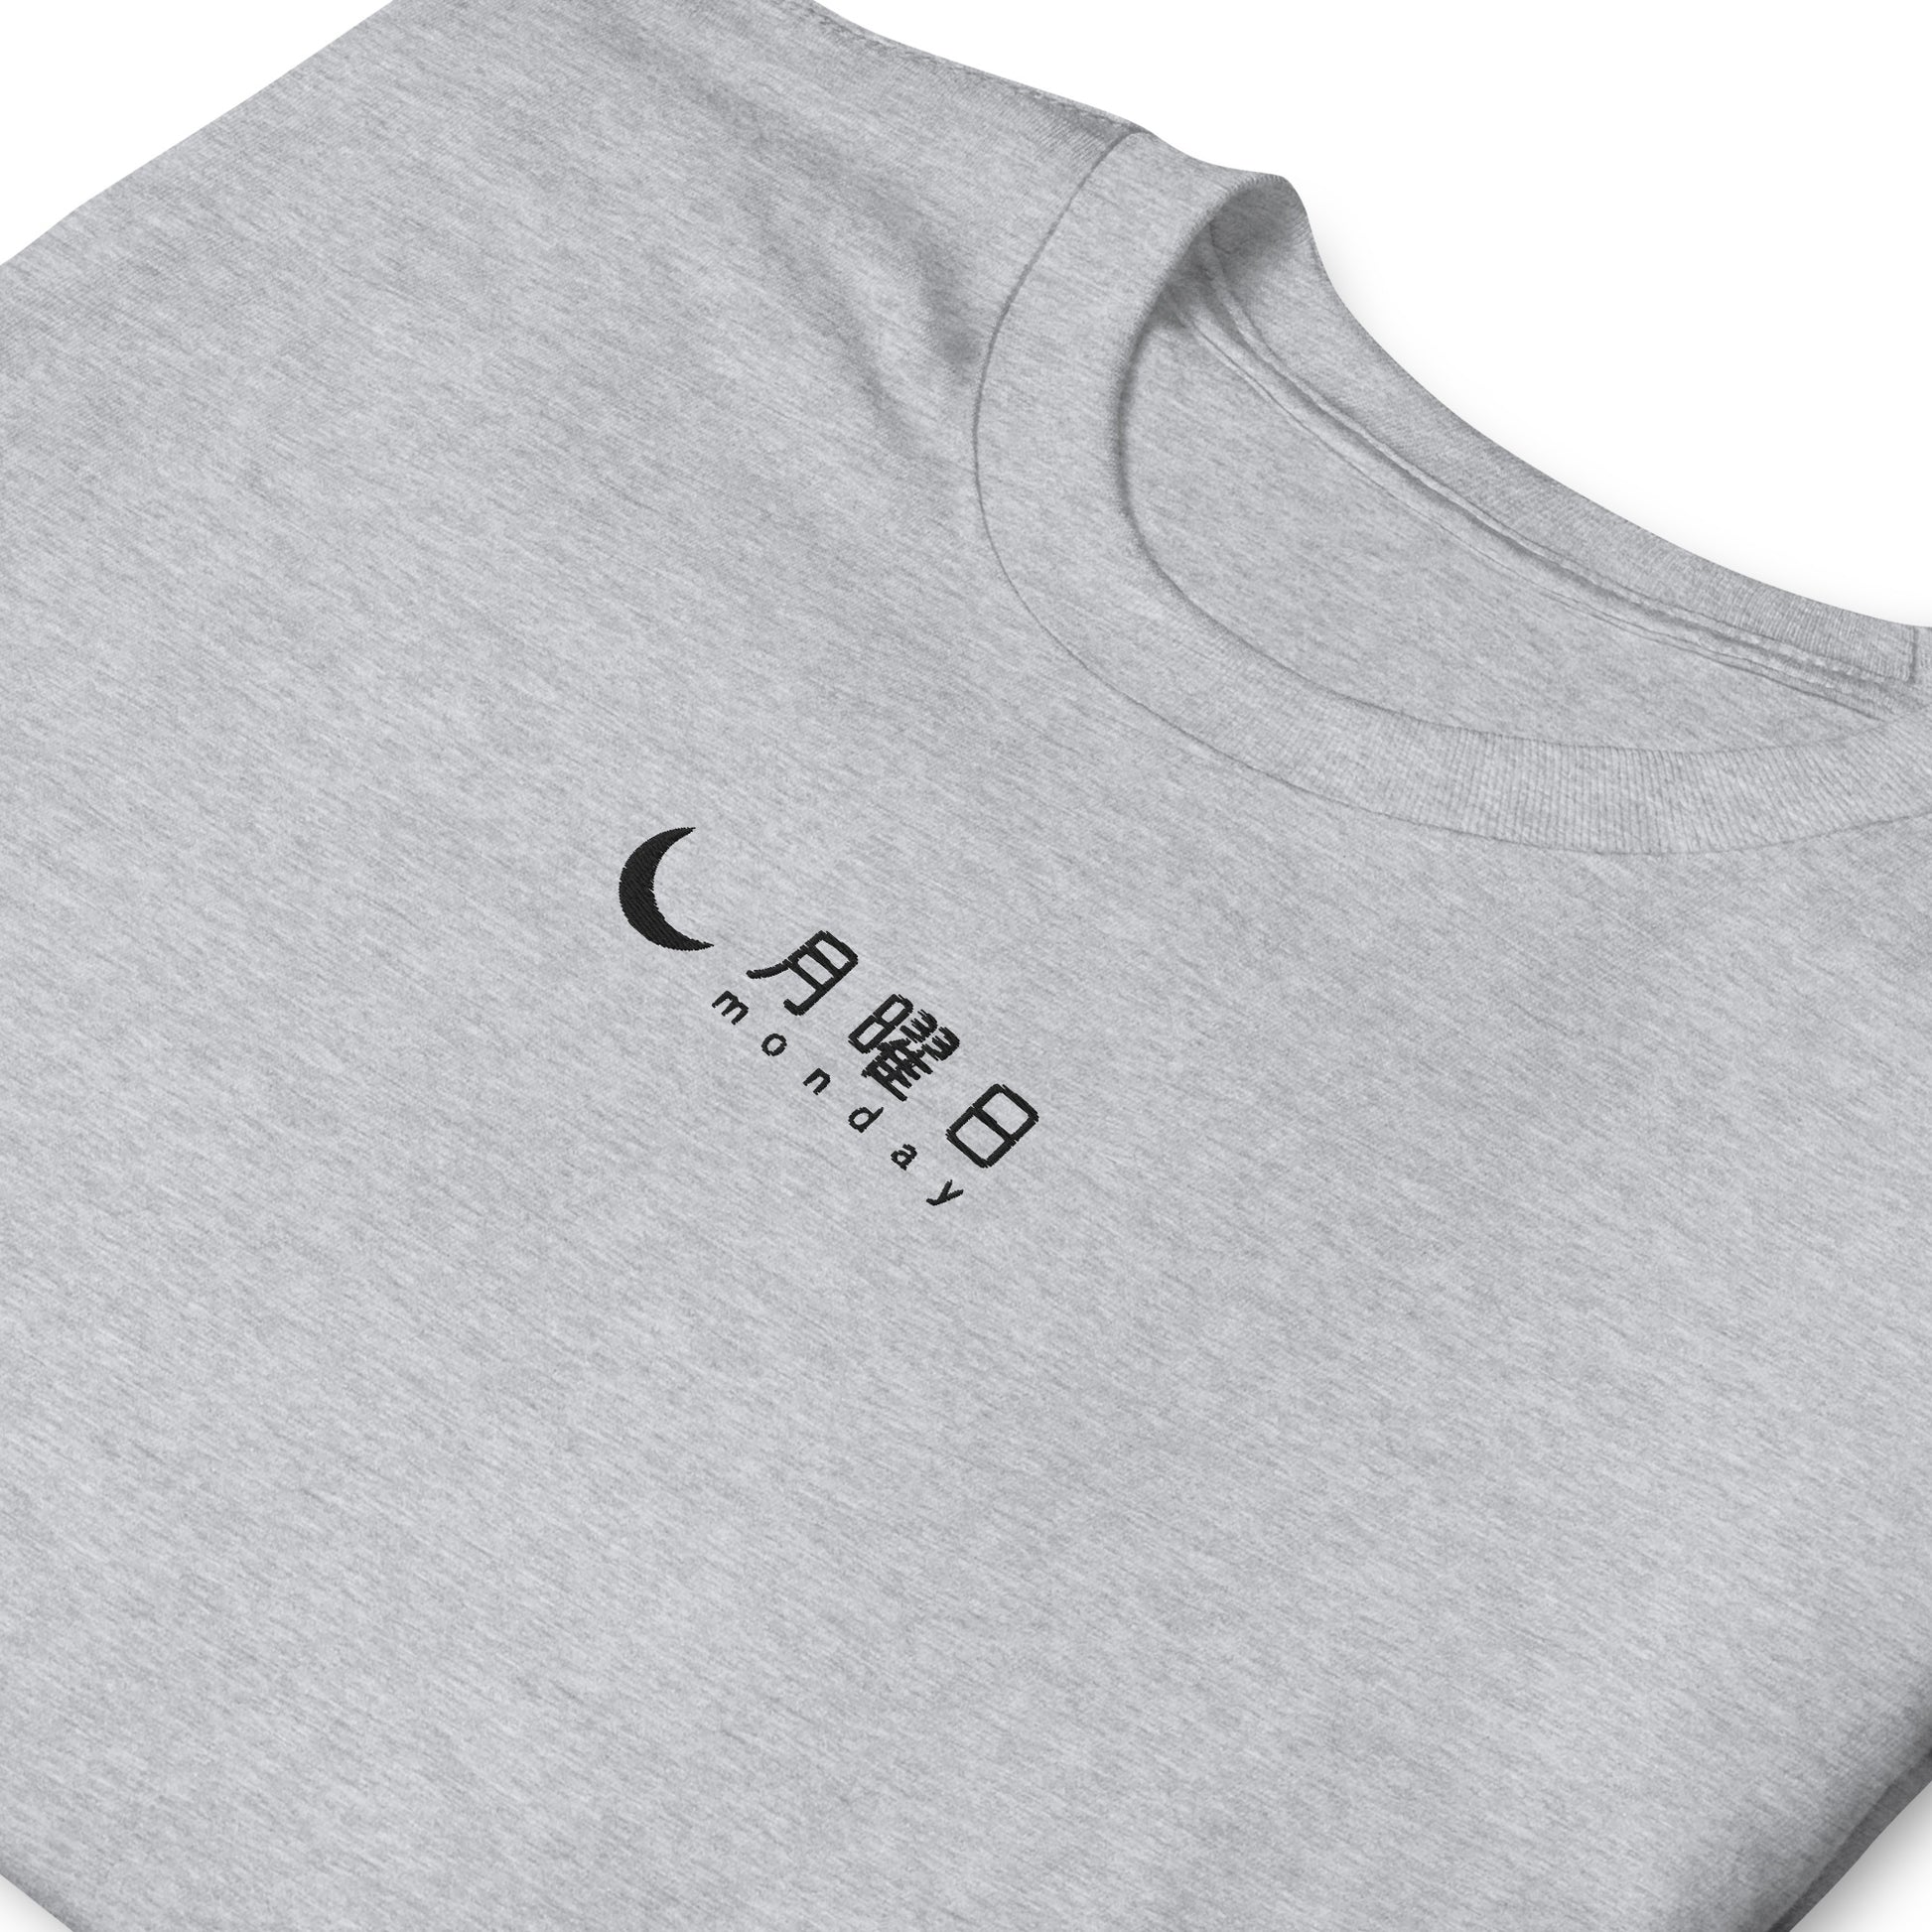 Light Gray High Quality Tee - Front Design with an Black "Monday" in Japanese and English